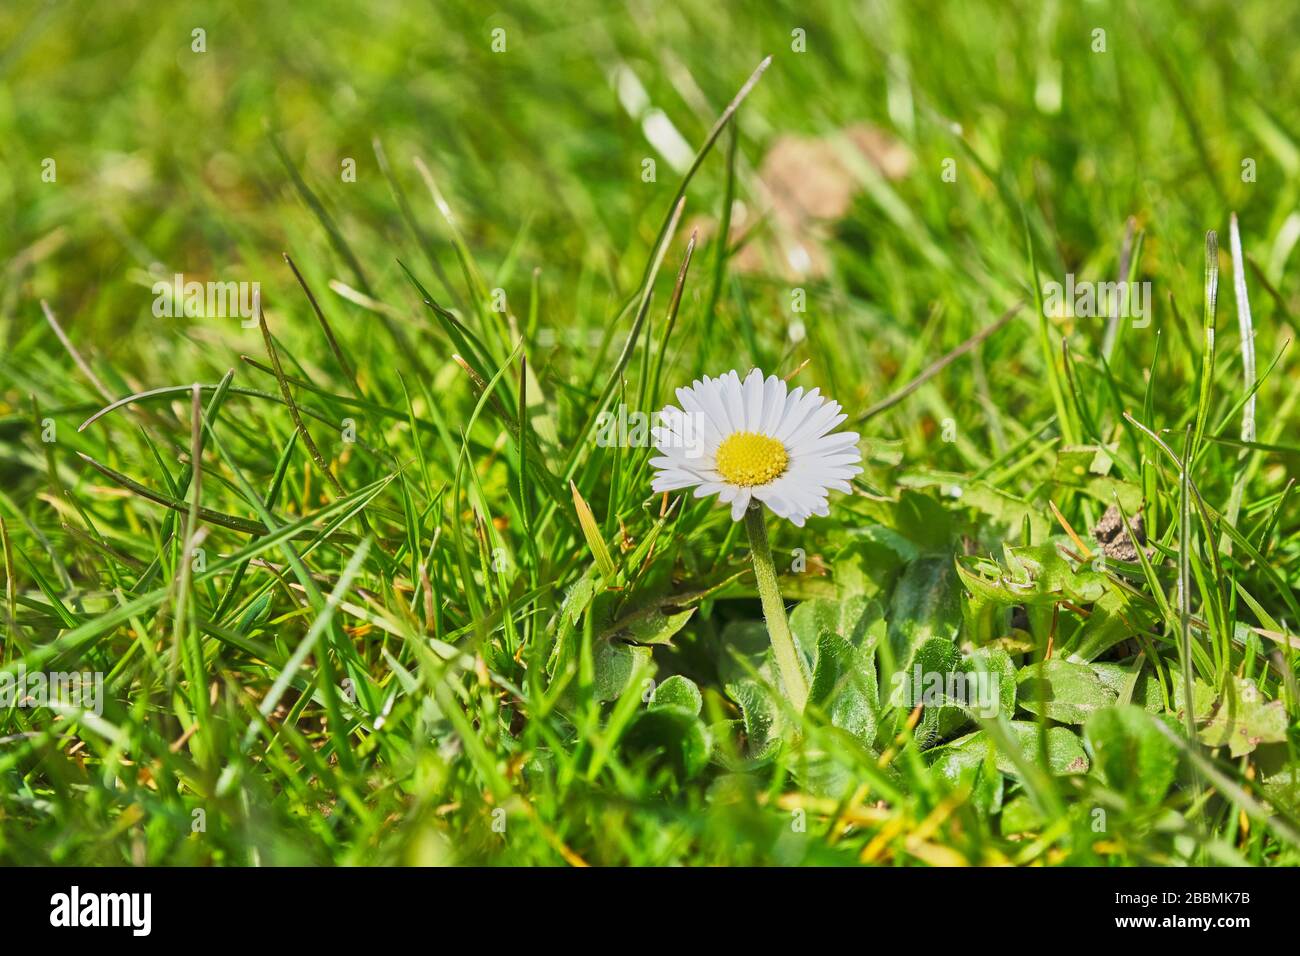 A single Common daisy Bellis perennis flower against a back drop of grass in a lawn Stock Photo